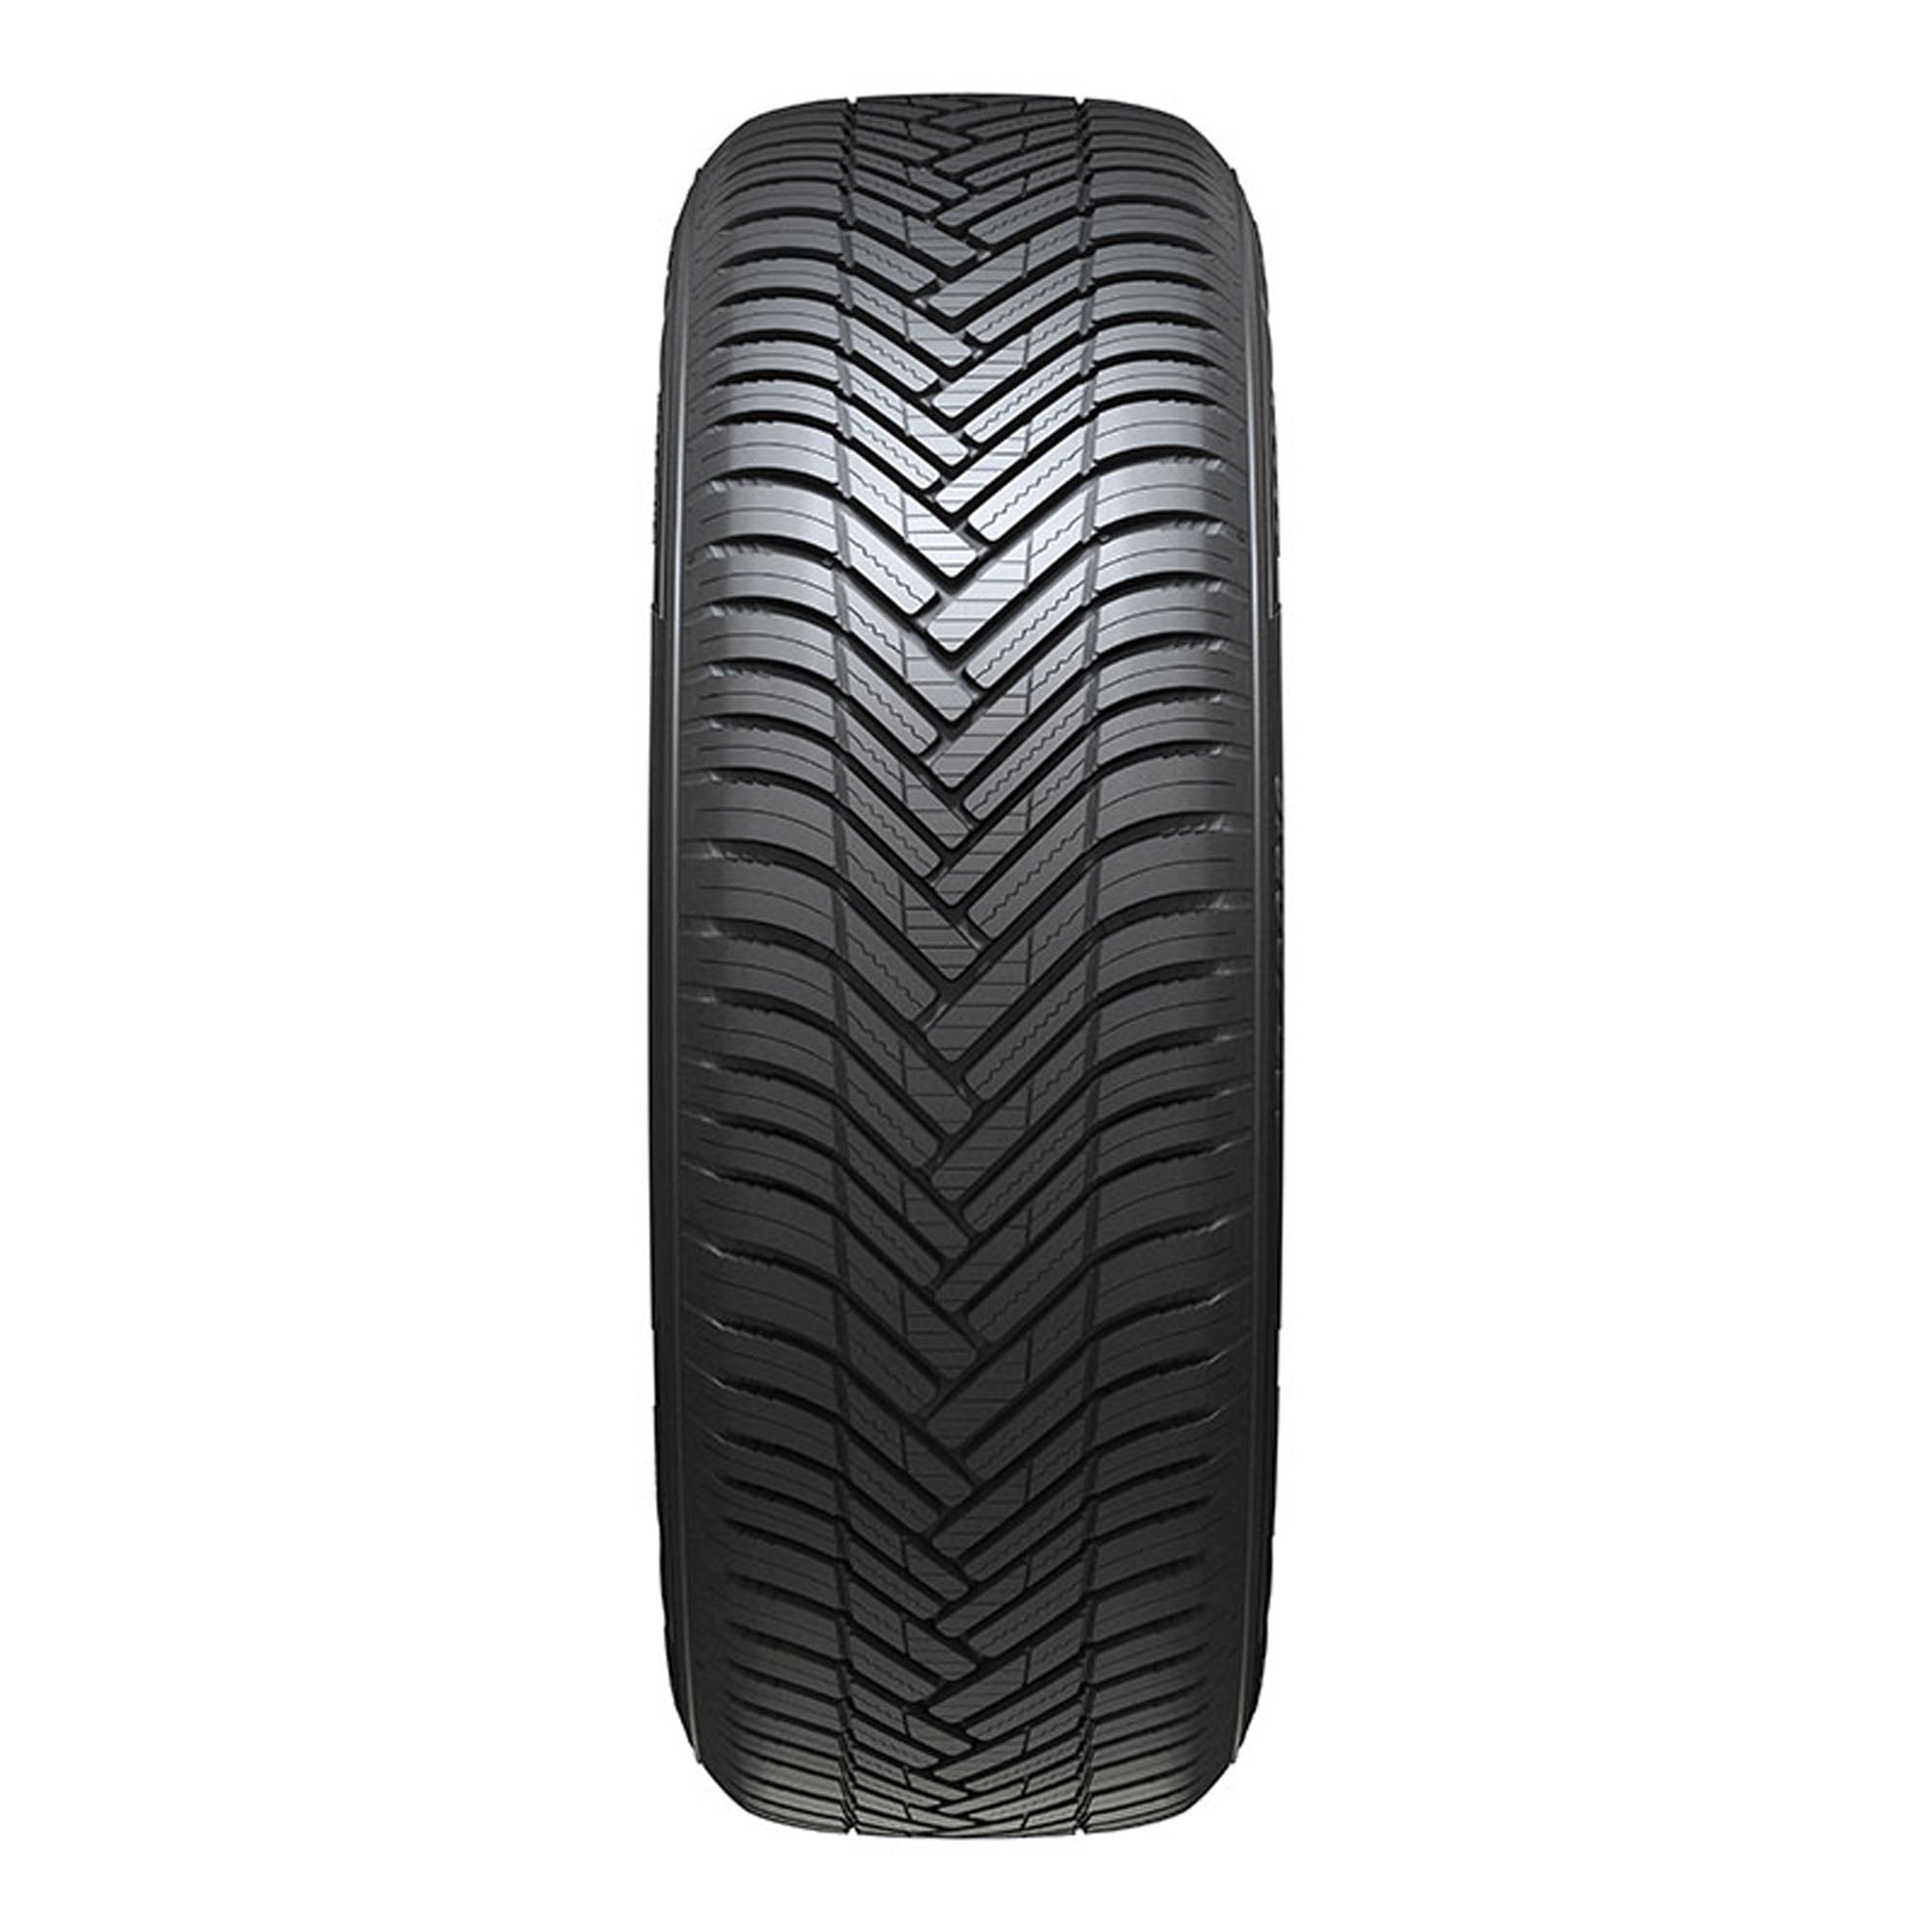 Kinergy 225/60R17 SUV/Crossover 4S2 99H Tire X Weather All Hankook (H750A)